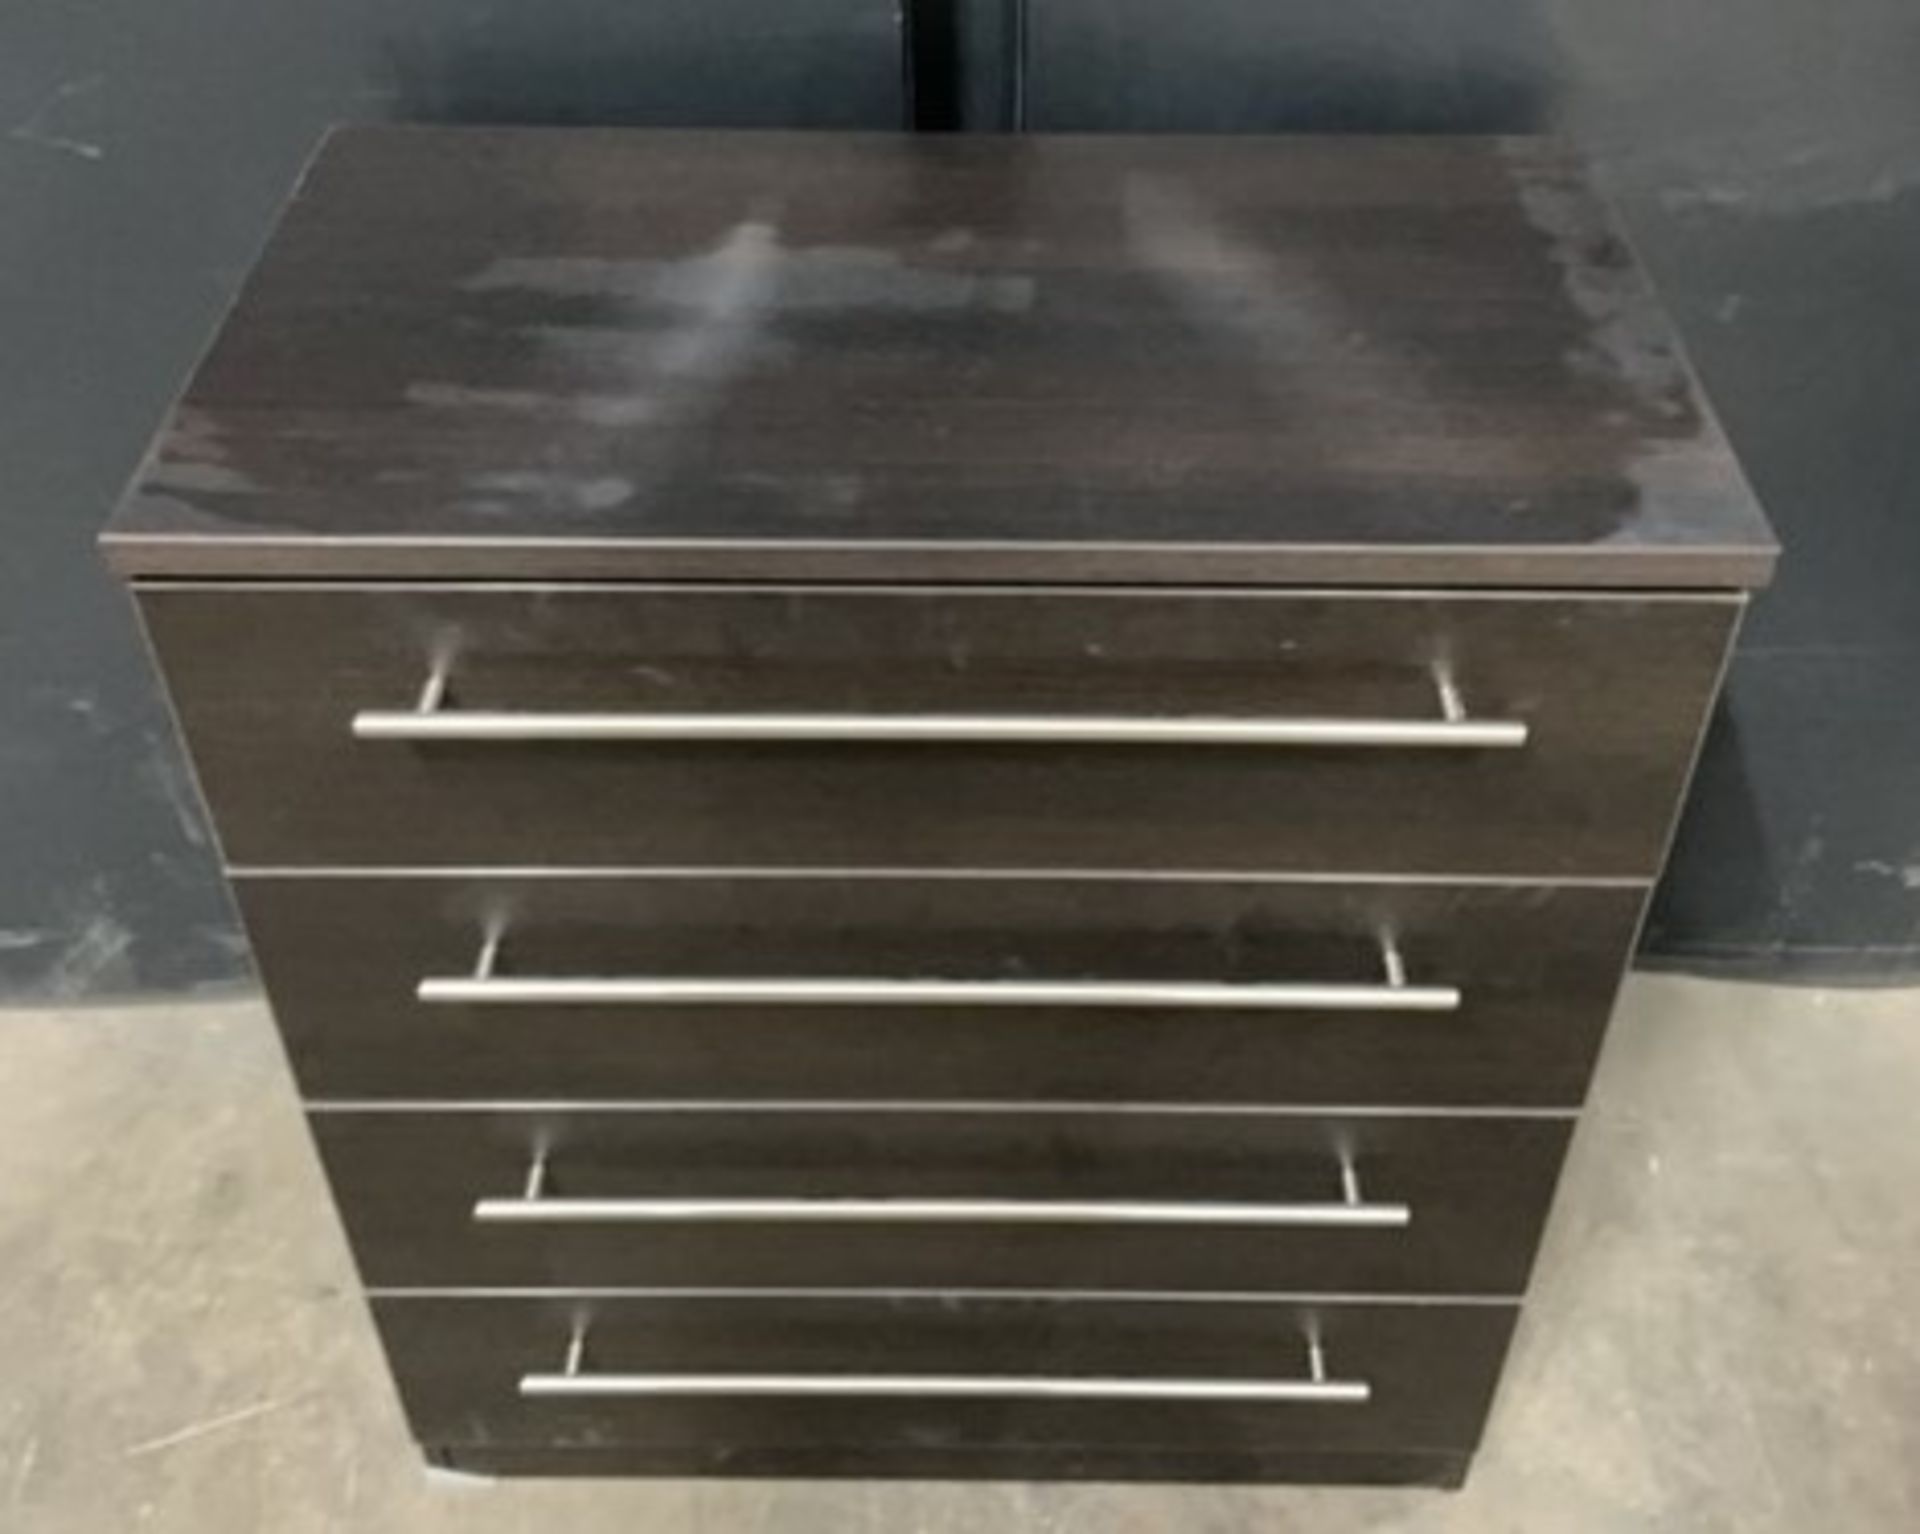 5 Drawer Chest of Drawers | Size: 88cm x 39cm x 64cm - Image 2 of 3